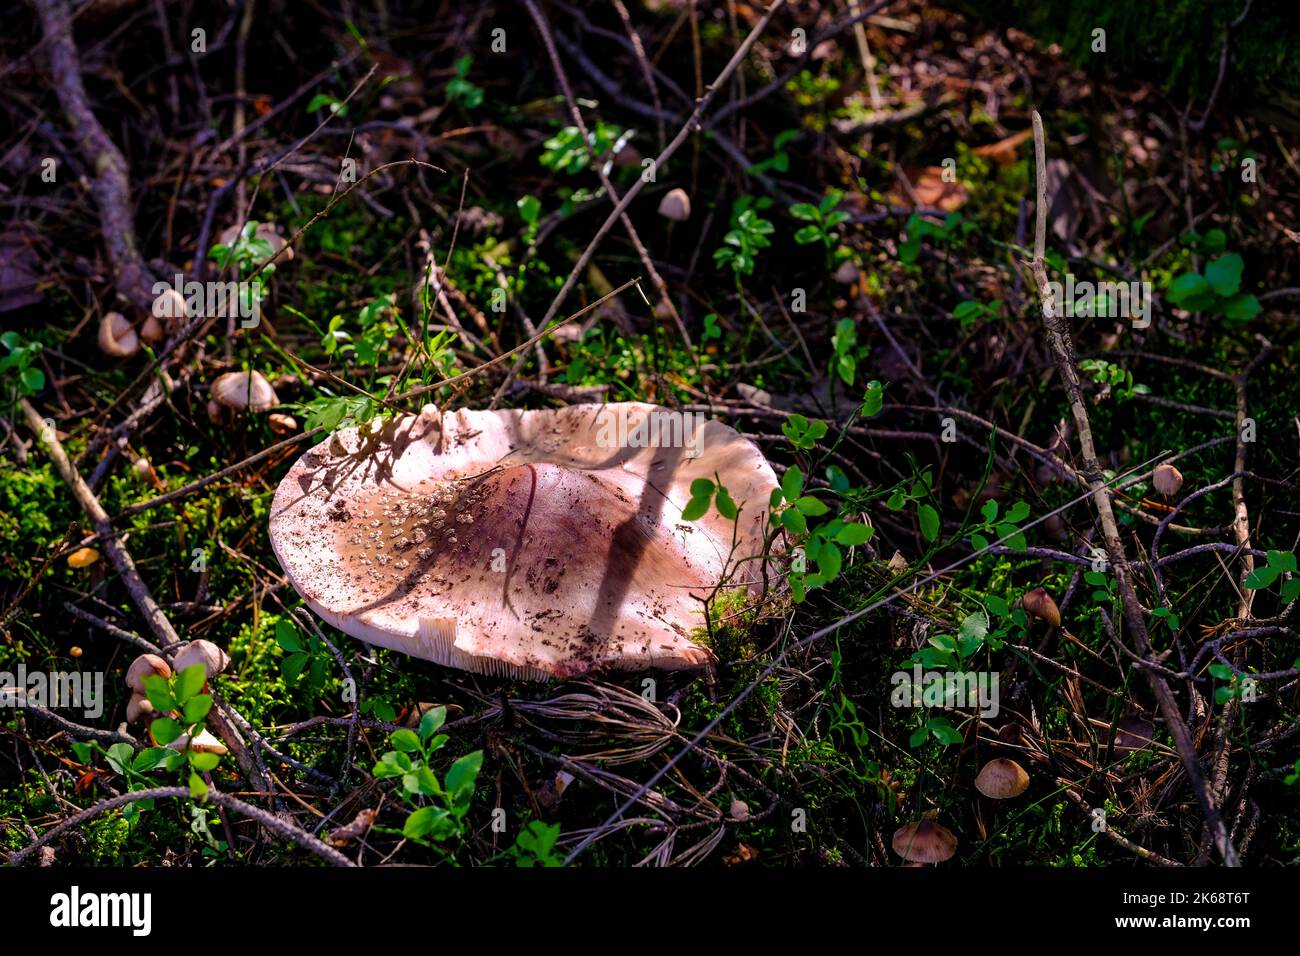 In the autumn forests in Bavaria, they can be found almost everywhere: Mushrooms in all colors. Stock Photo